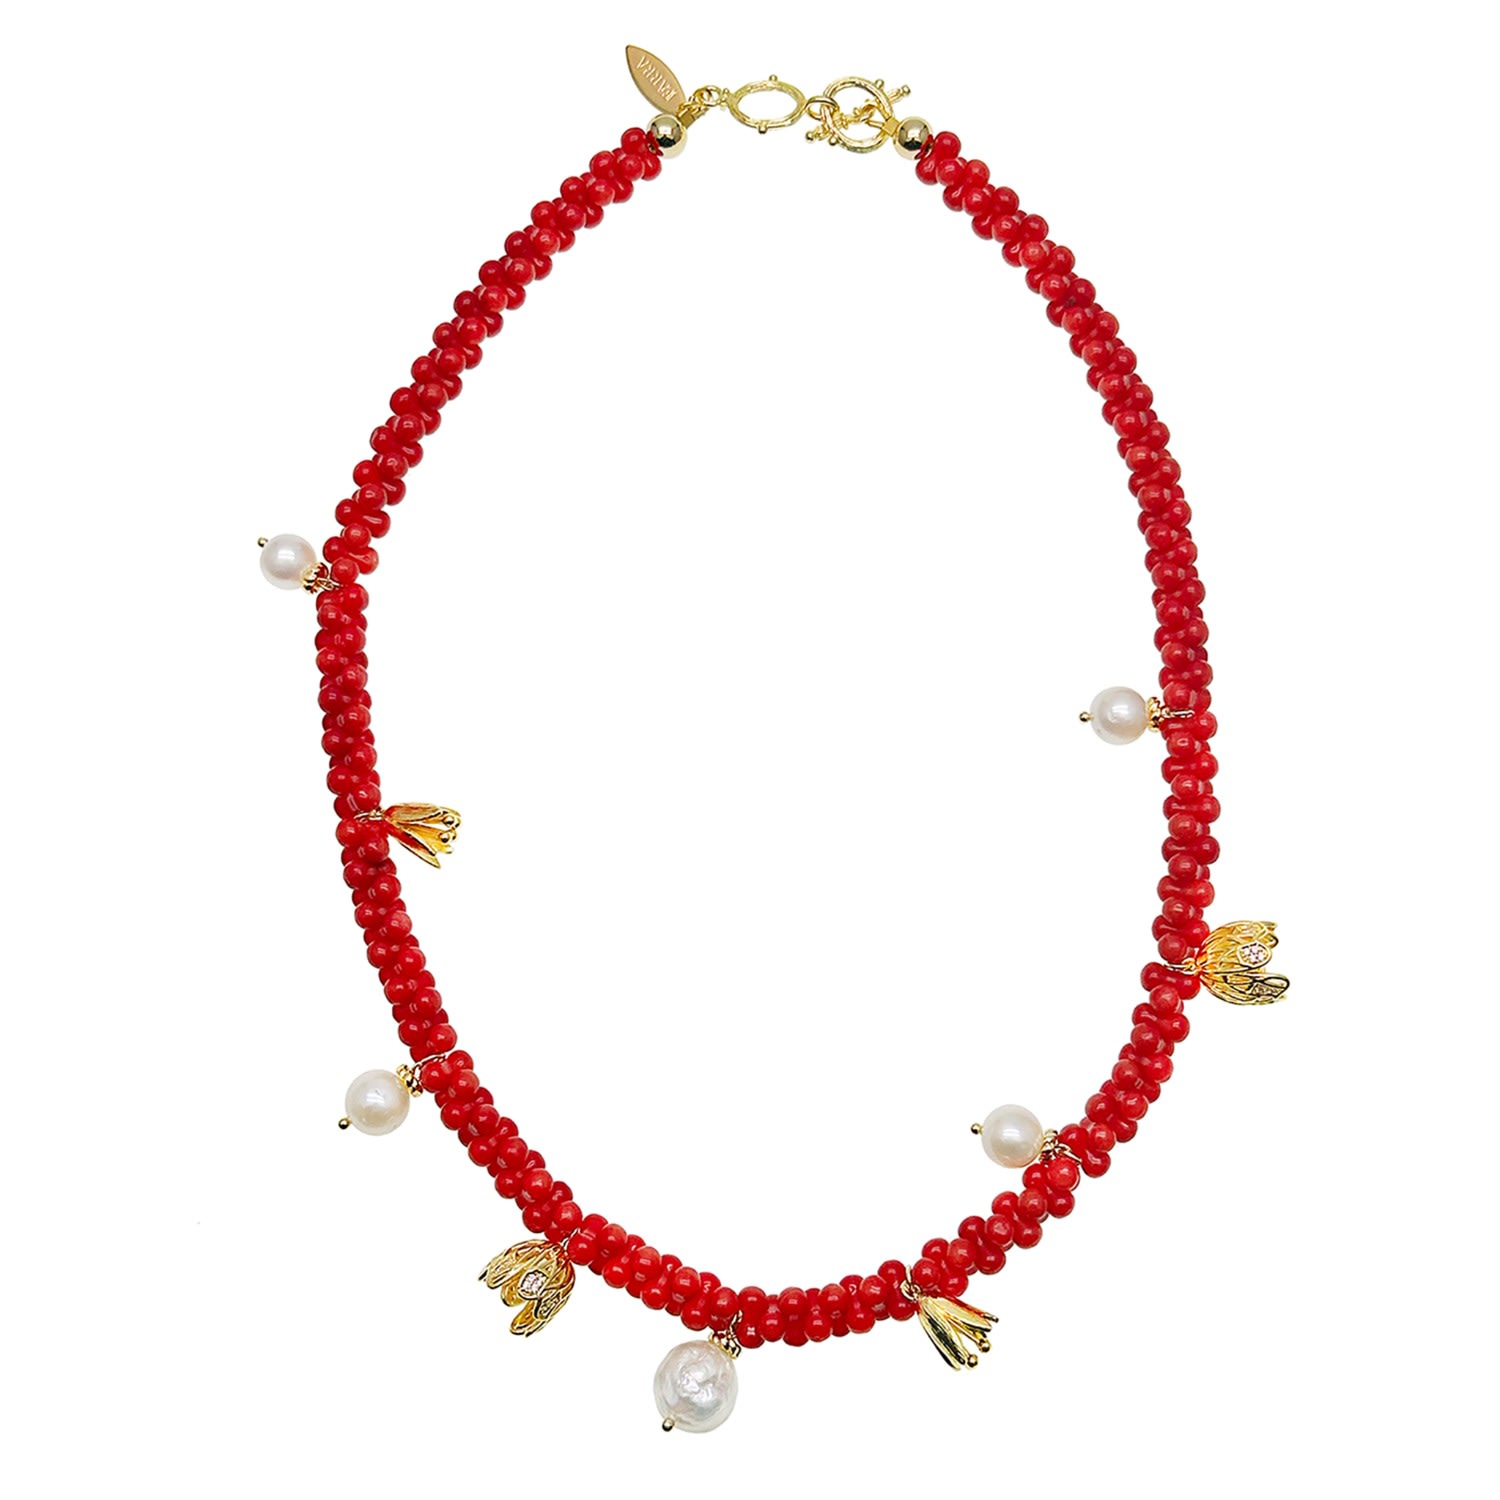 Women’s Peanut Shaped Red Coral Statement Necklace Farra